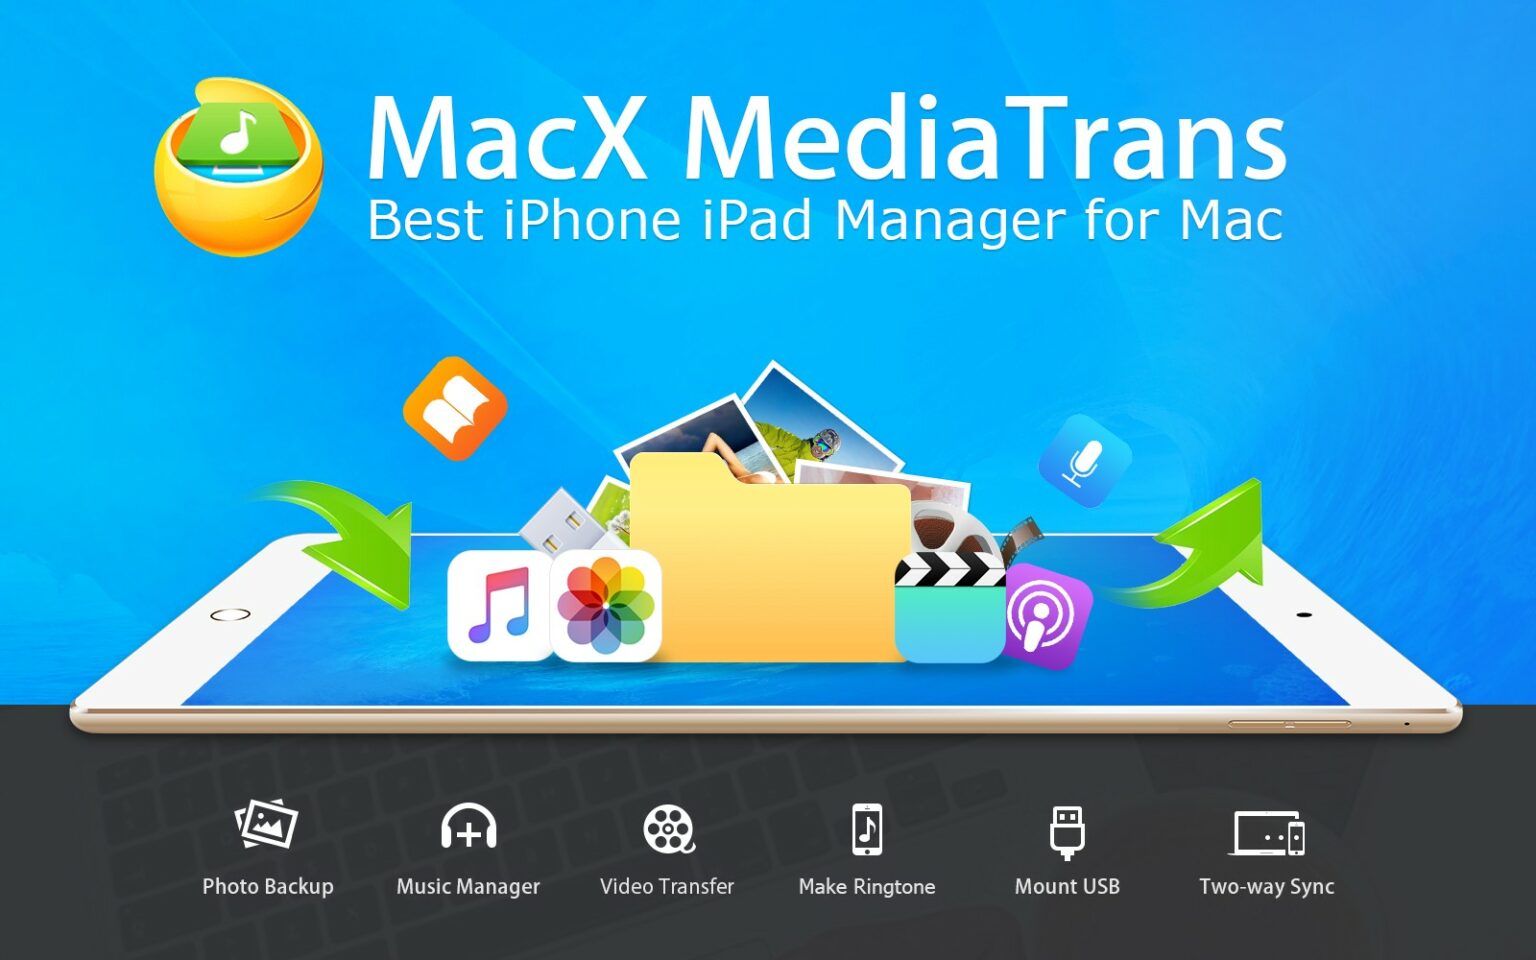 Digiarty offers a free giveaway of MacX MediaTrans.